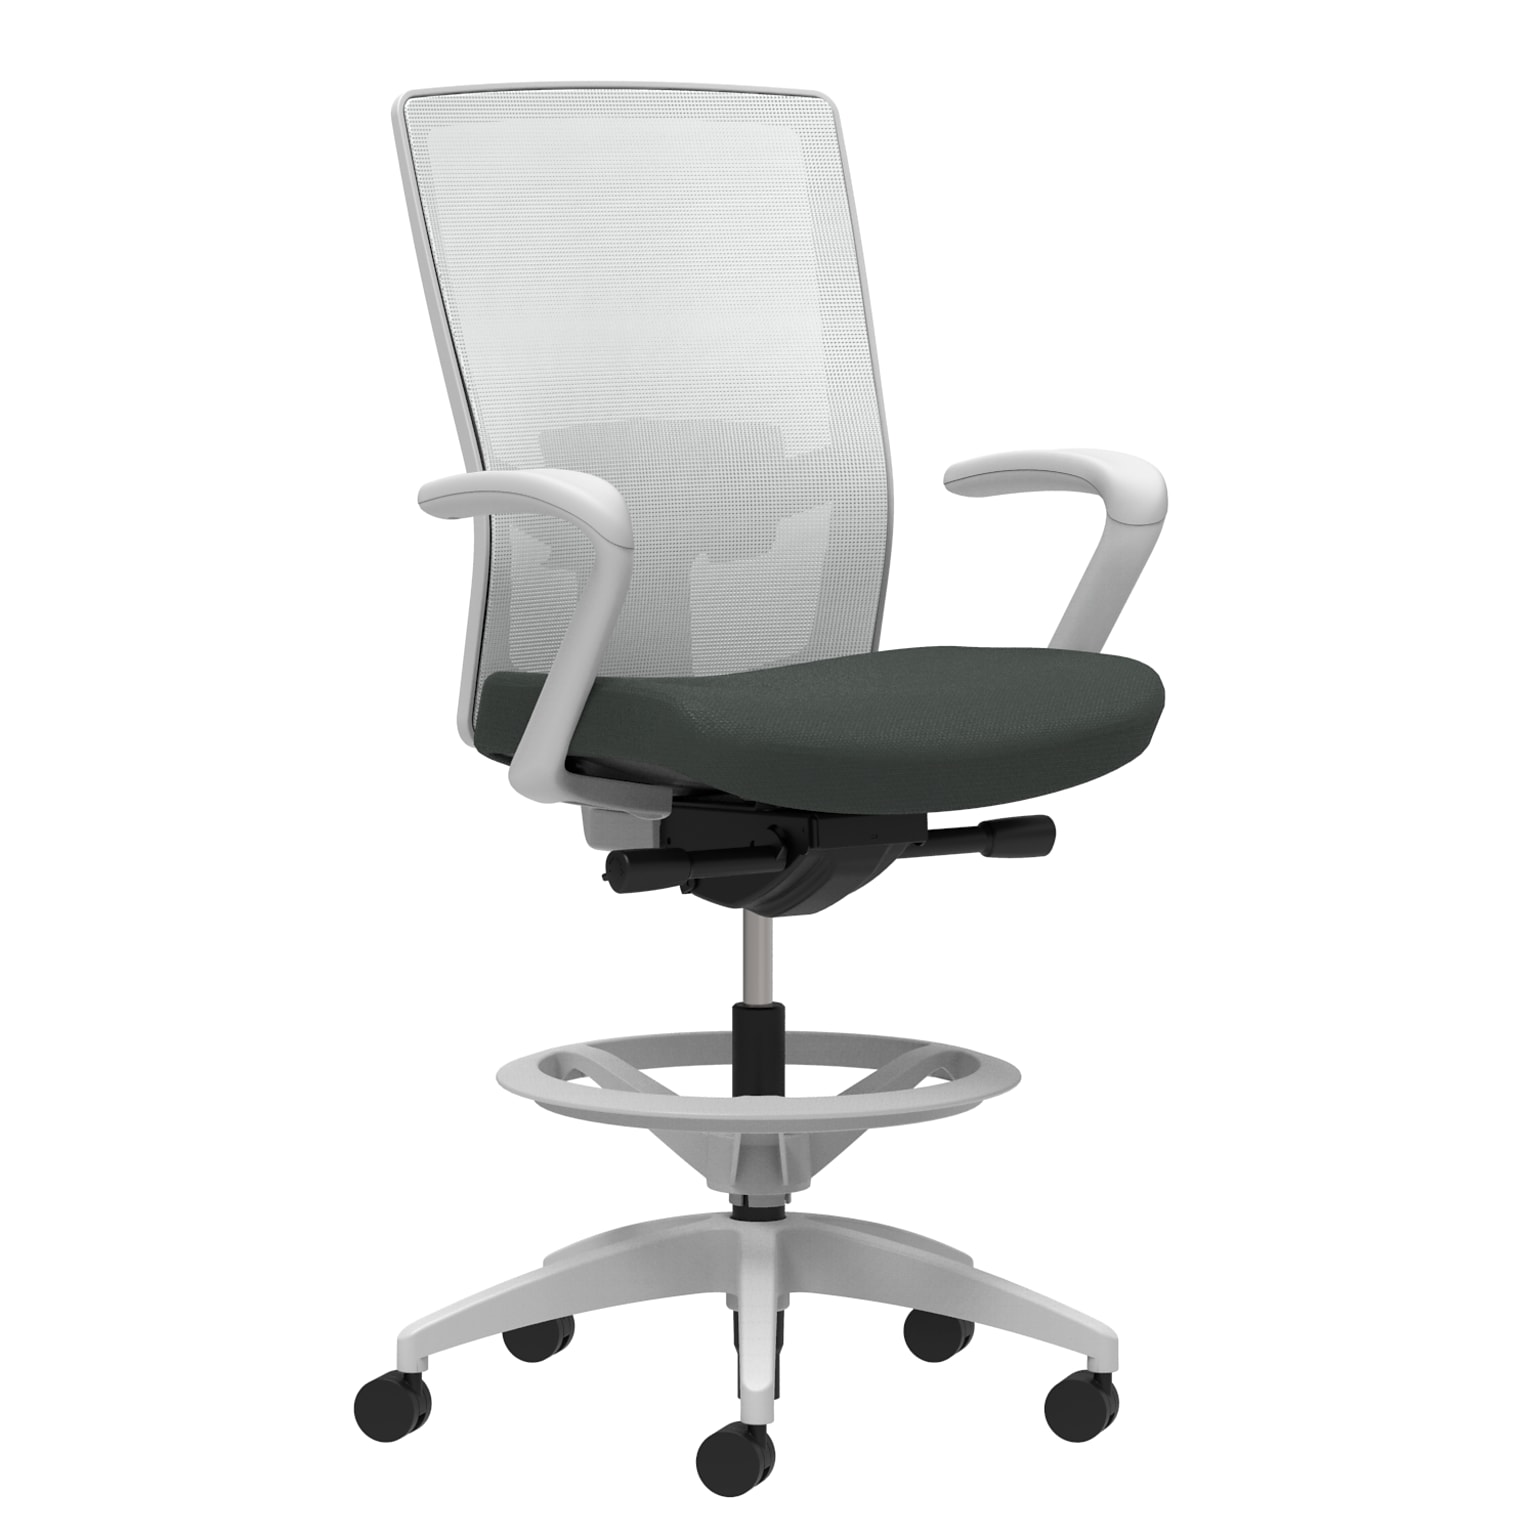 Union & Scale Workplace2.0™ Fabric Stool, Iron Ore, Adjustable Lumbar, Fixed Arms, Synchro-Tilt Seat Control (53798)